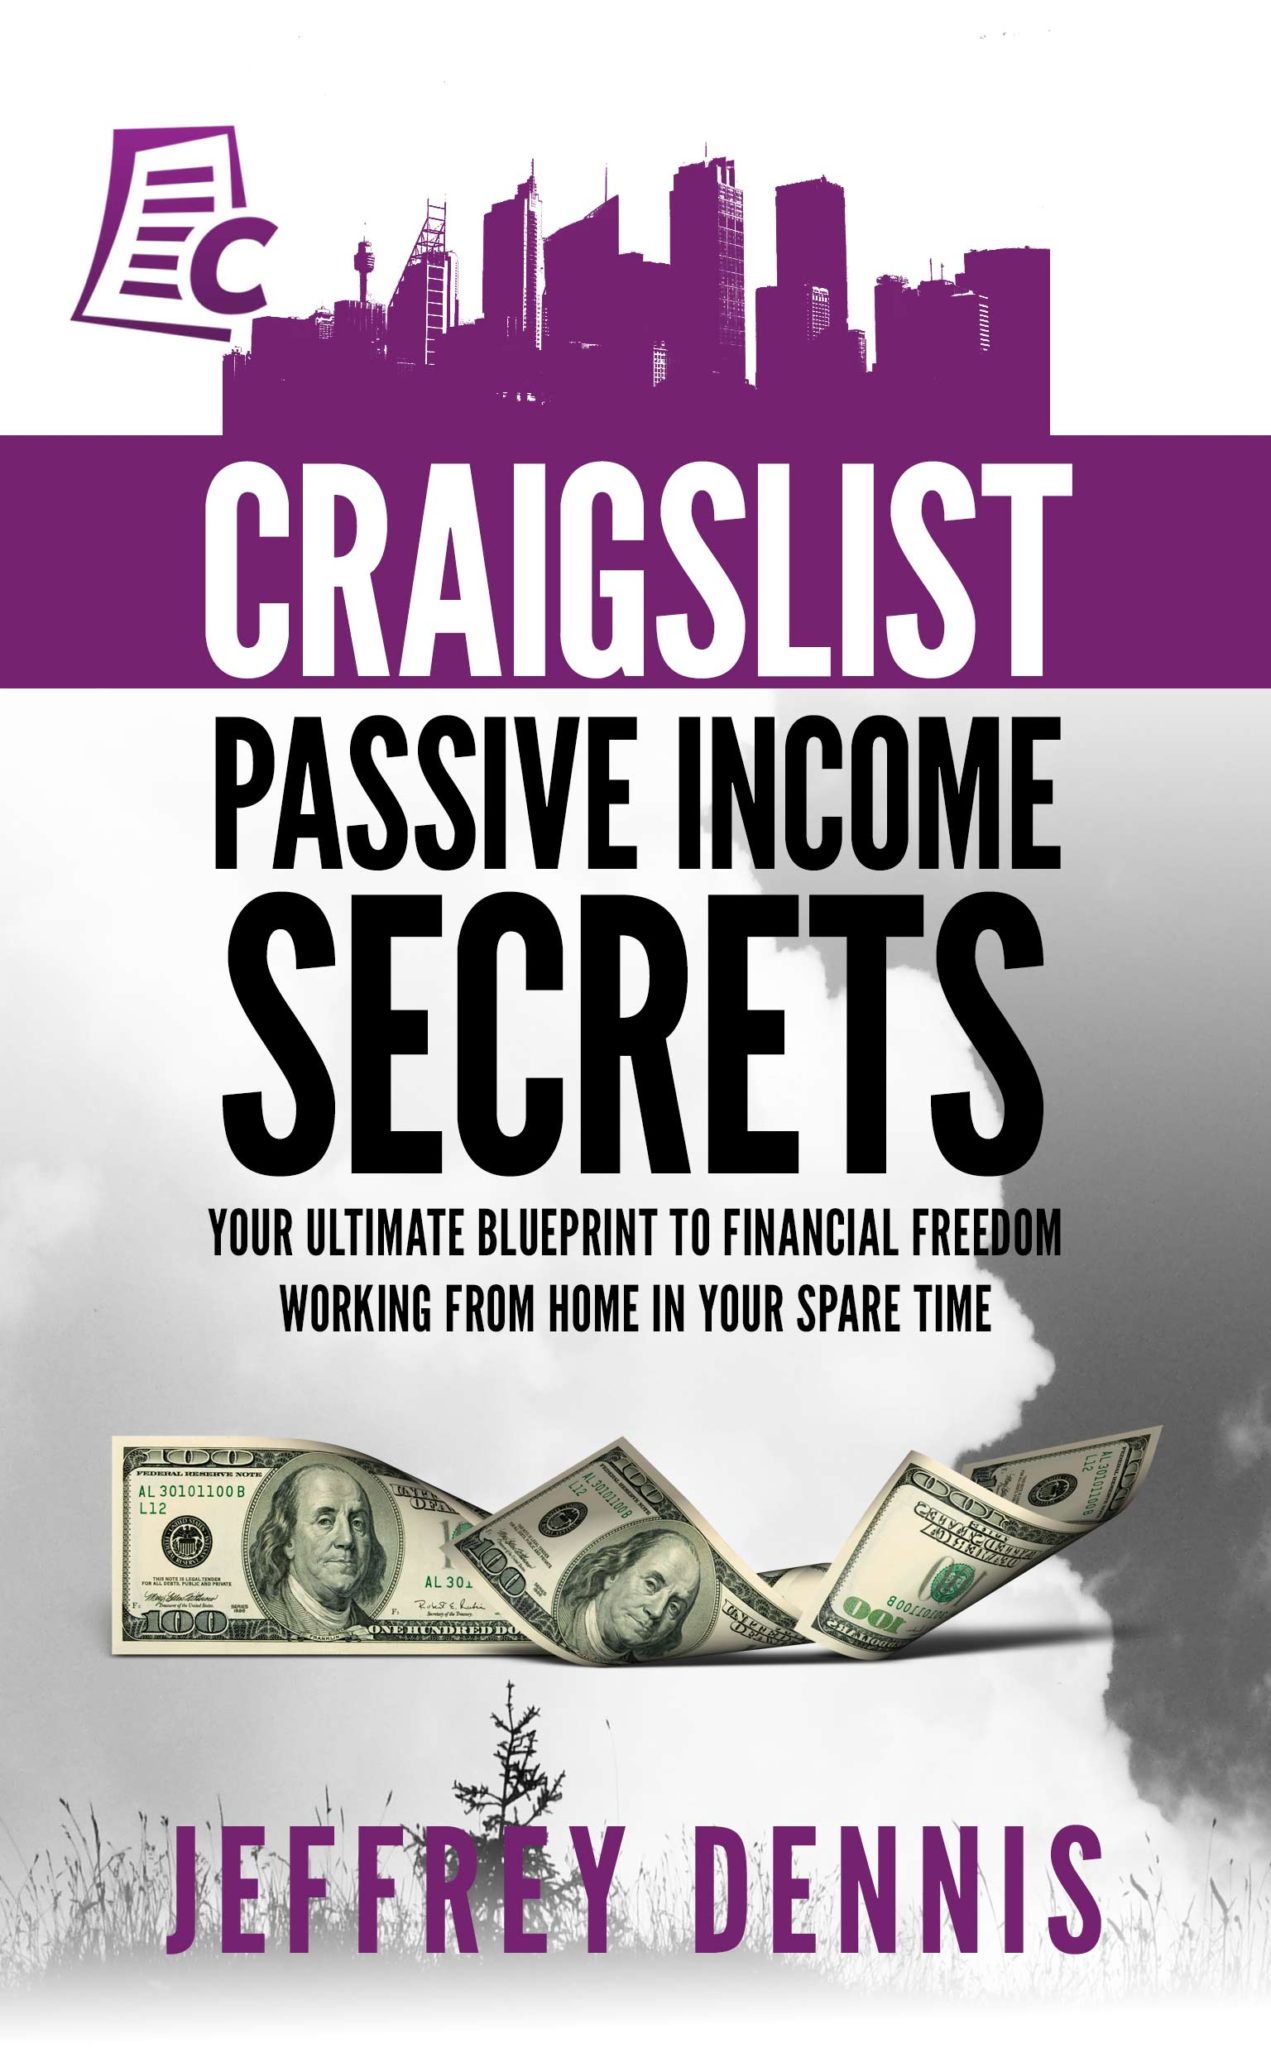 FREE: Craigslist Passive Income Secrets: Your ultimate blueprint to financial freedom working from home in your spare time by Jeffrey Dennis